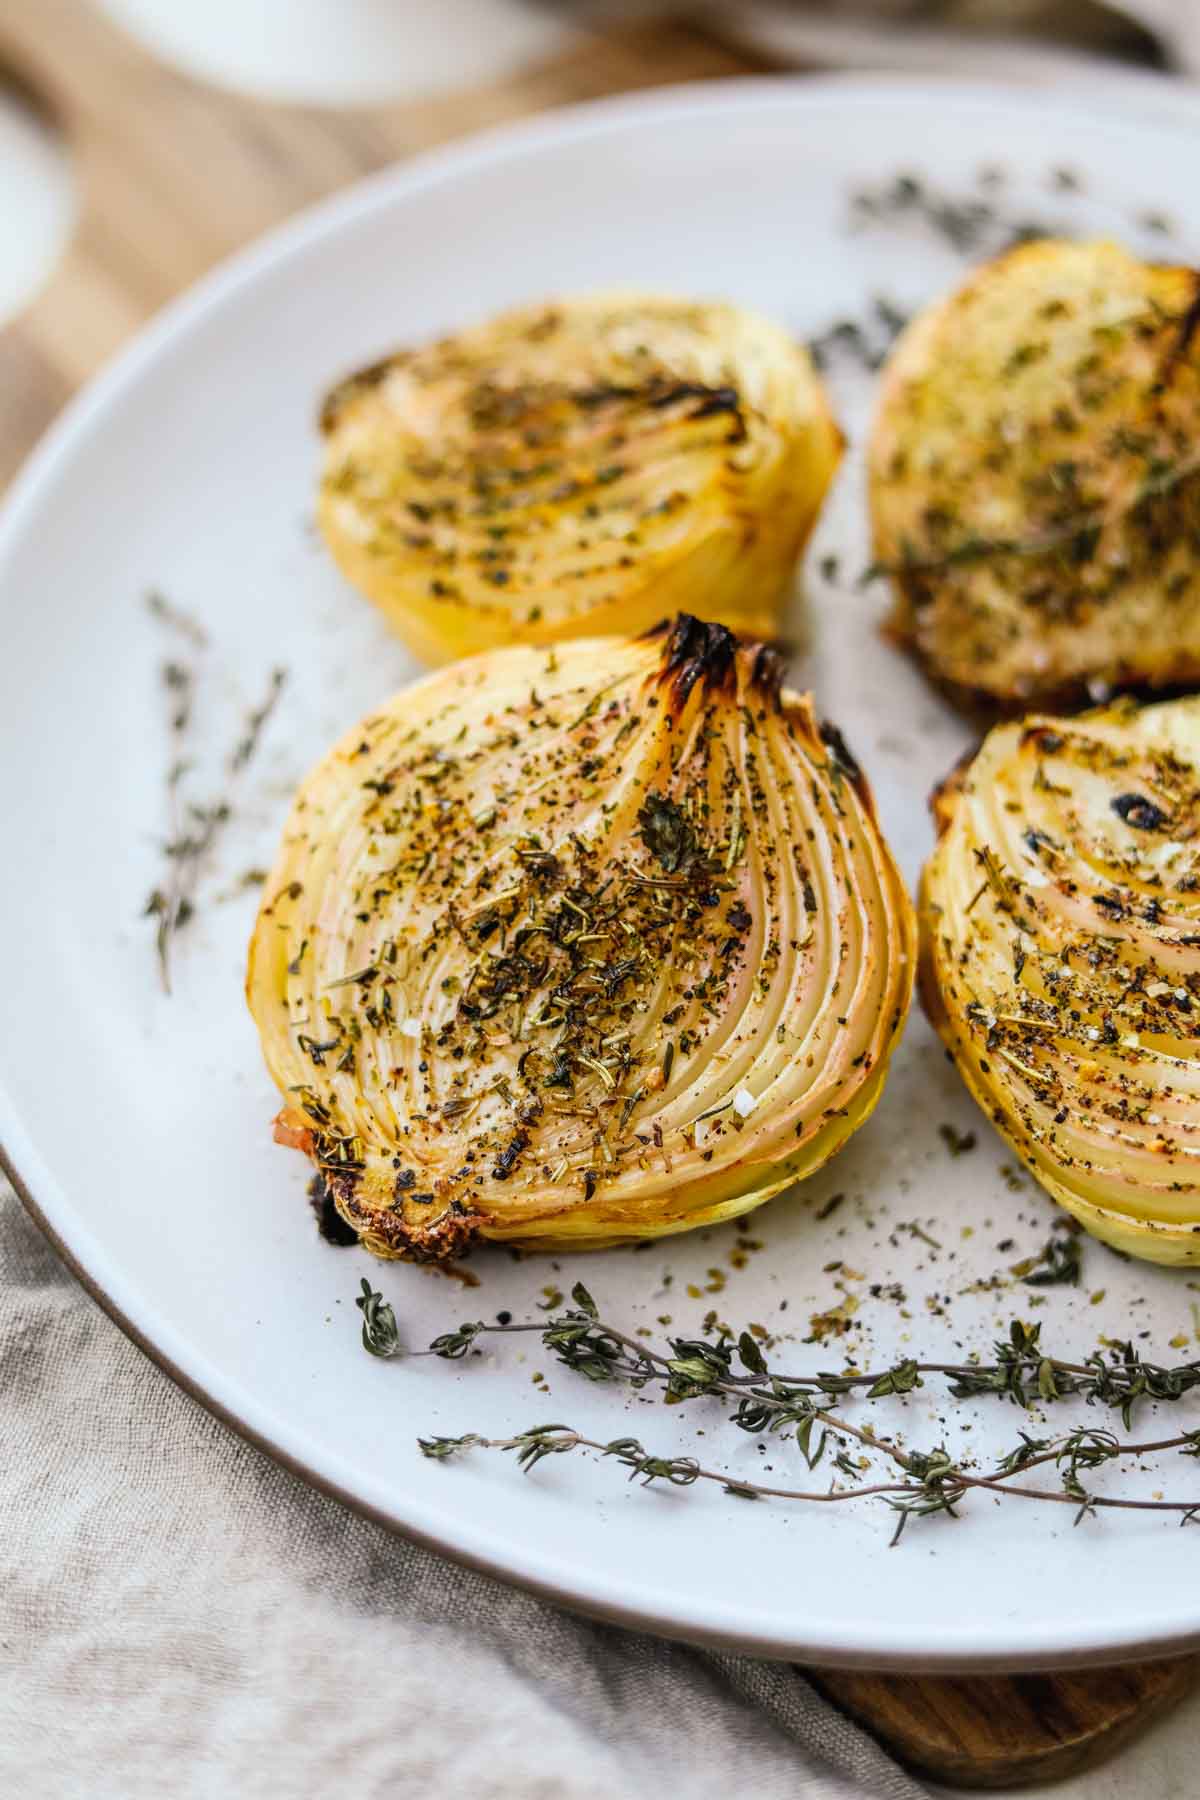 Oven roasted onions with herbs baked and served on a Heath Ceramics platter.